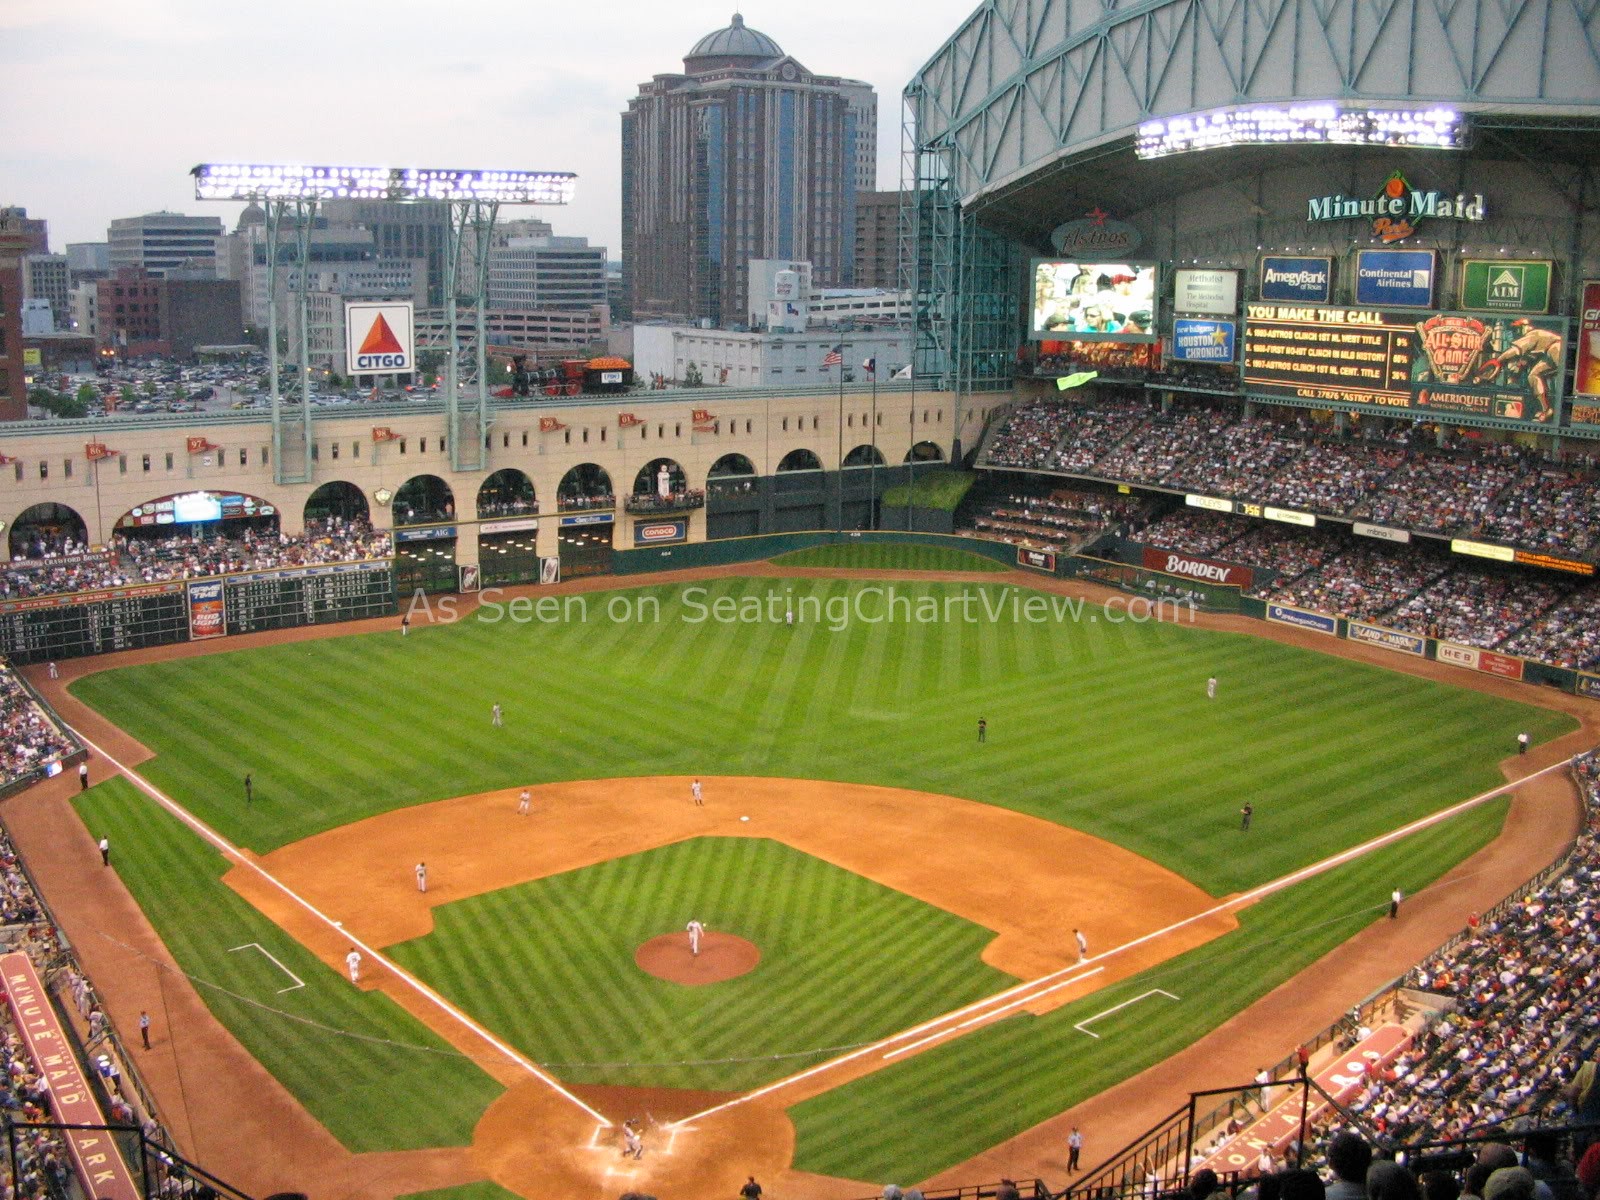 Everything We Learned on a Private Tour of Minute Maid Park